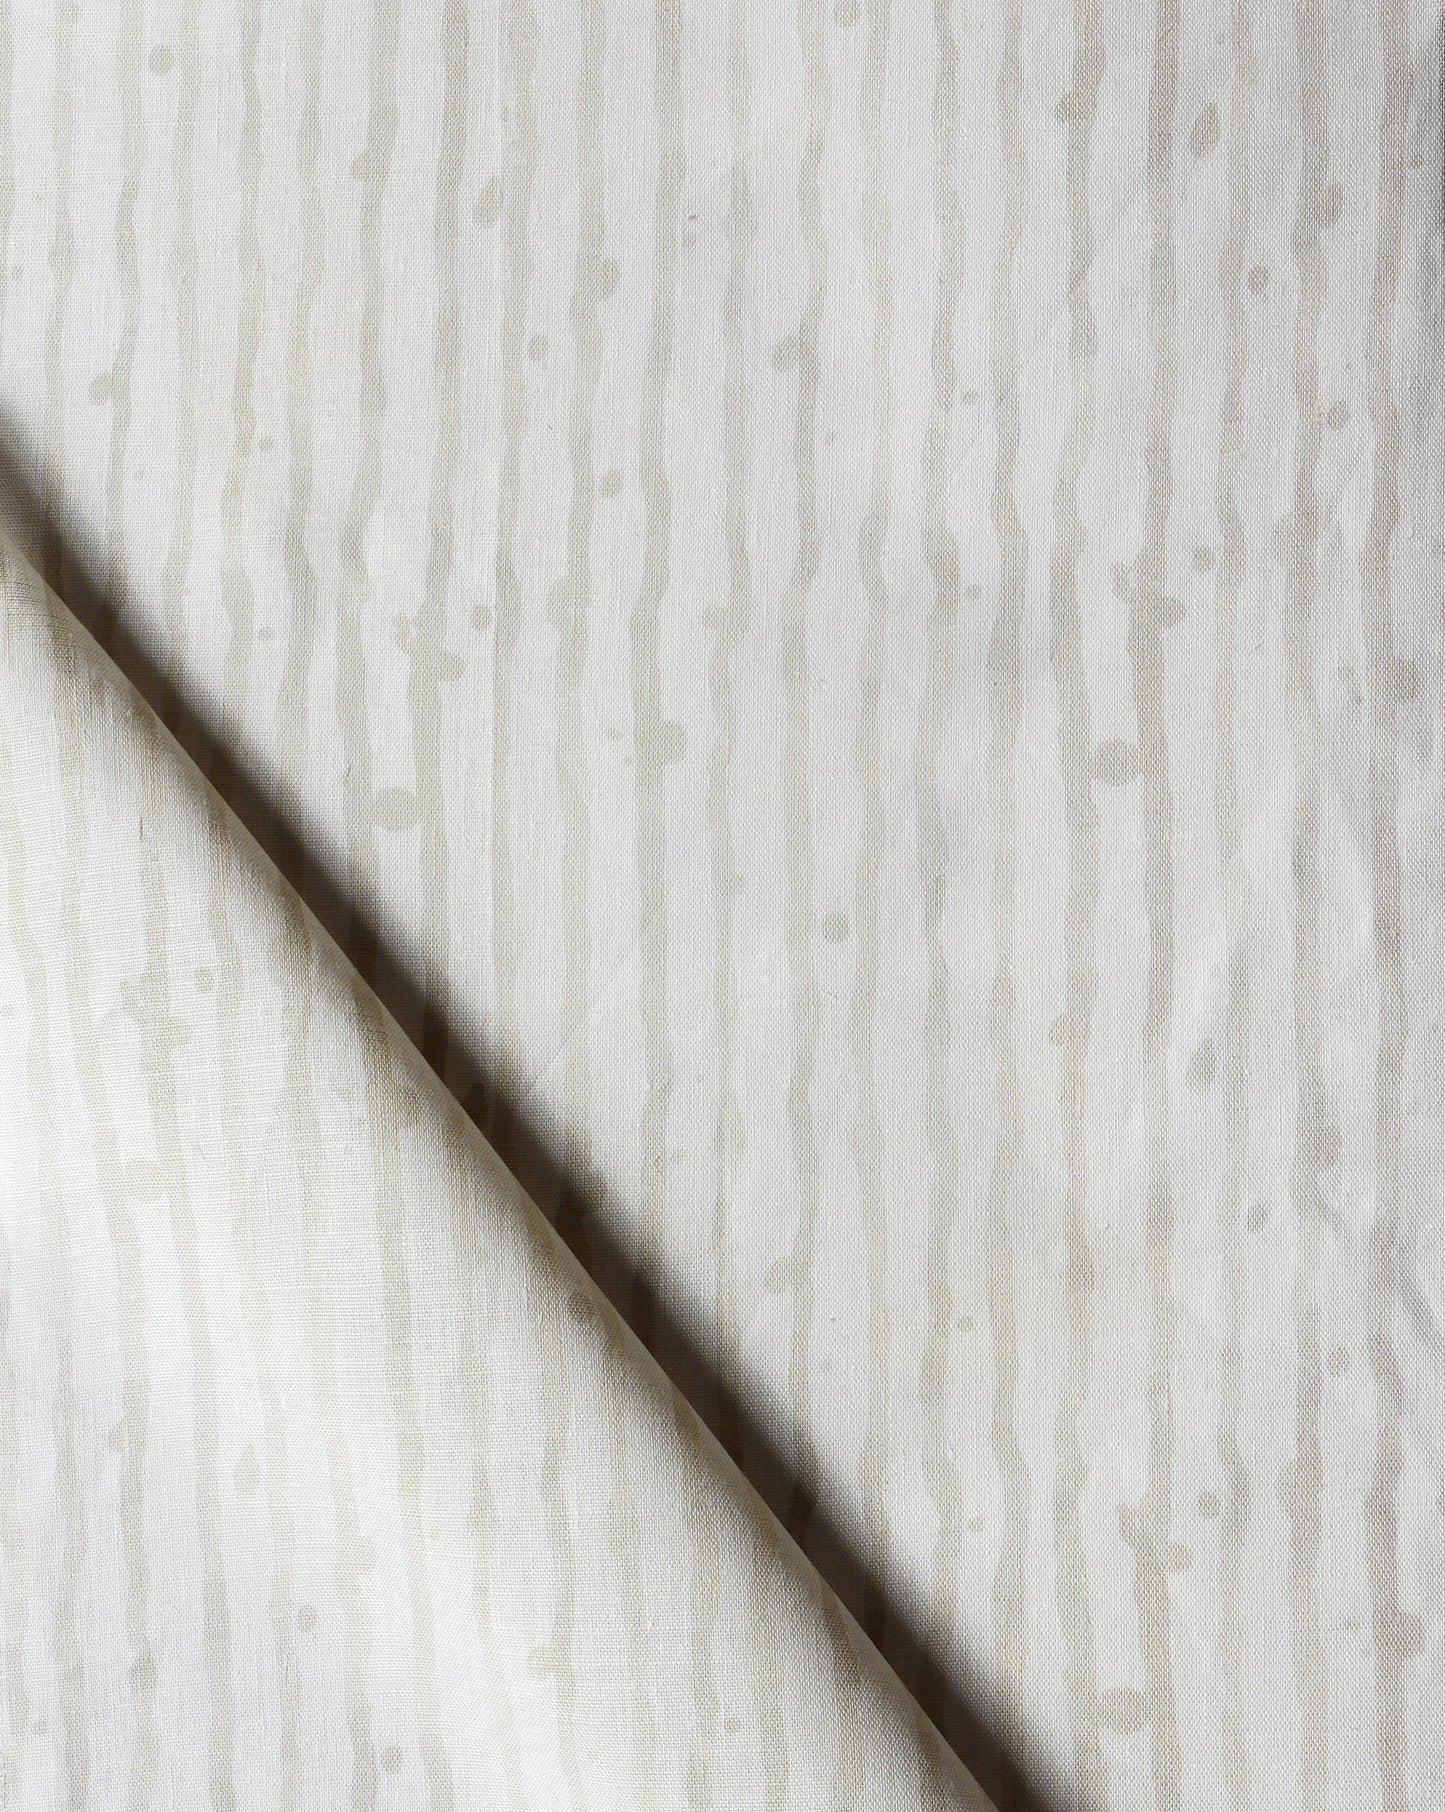 A close up of a white and gray Drippy Stripe Fabric Sand